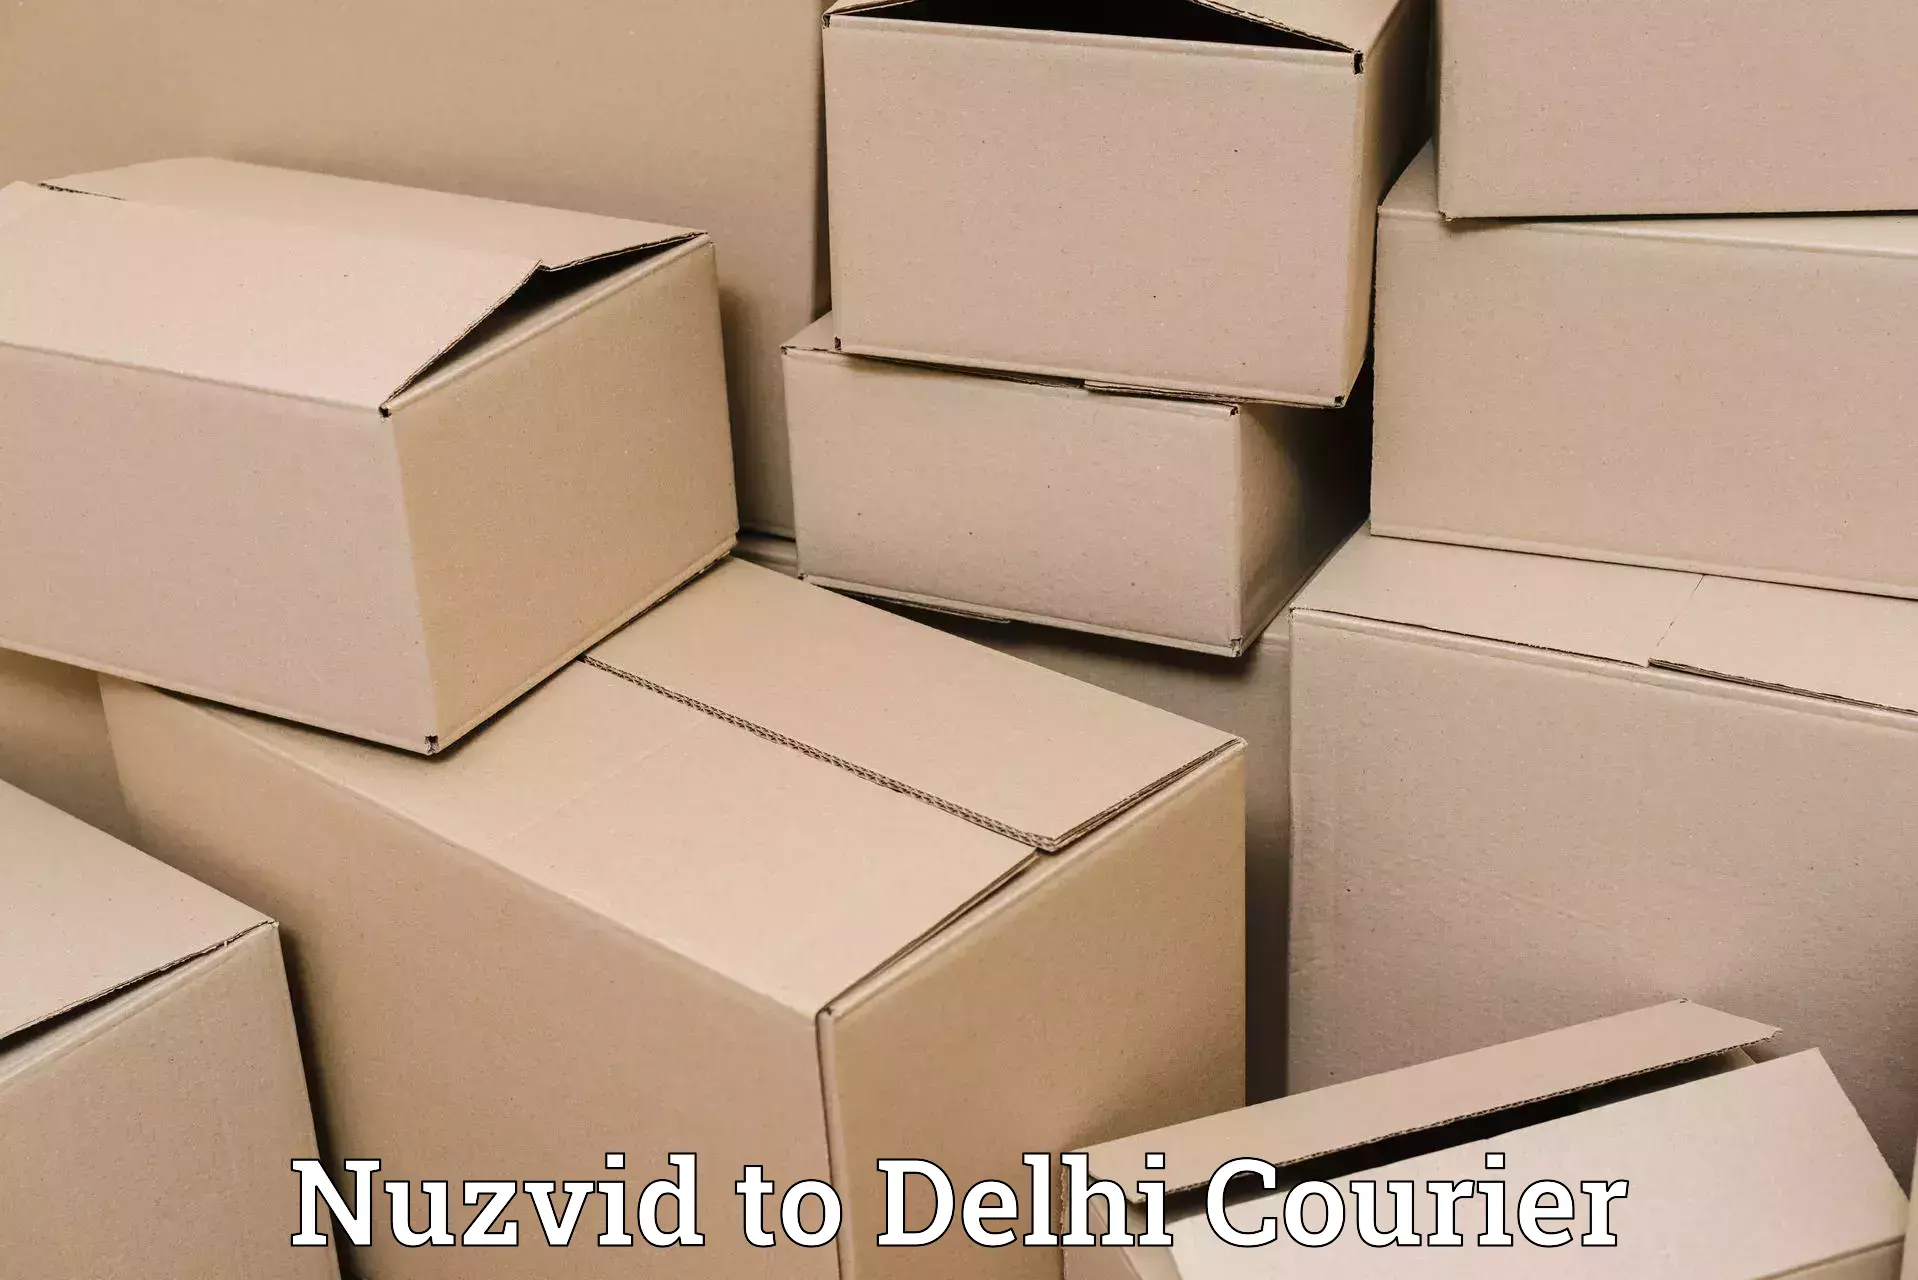 Courier service innovation Nuzvid to Lodhi Road